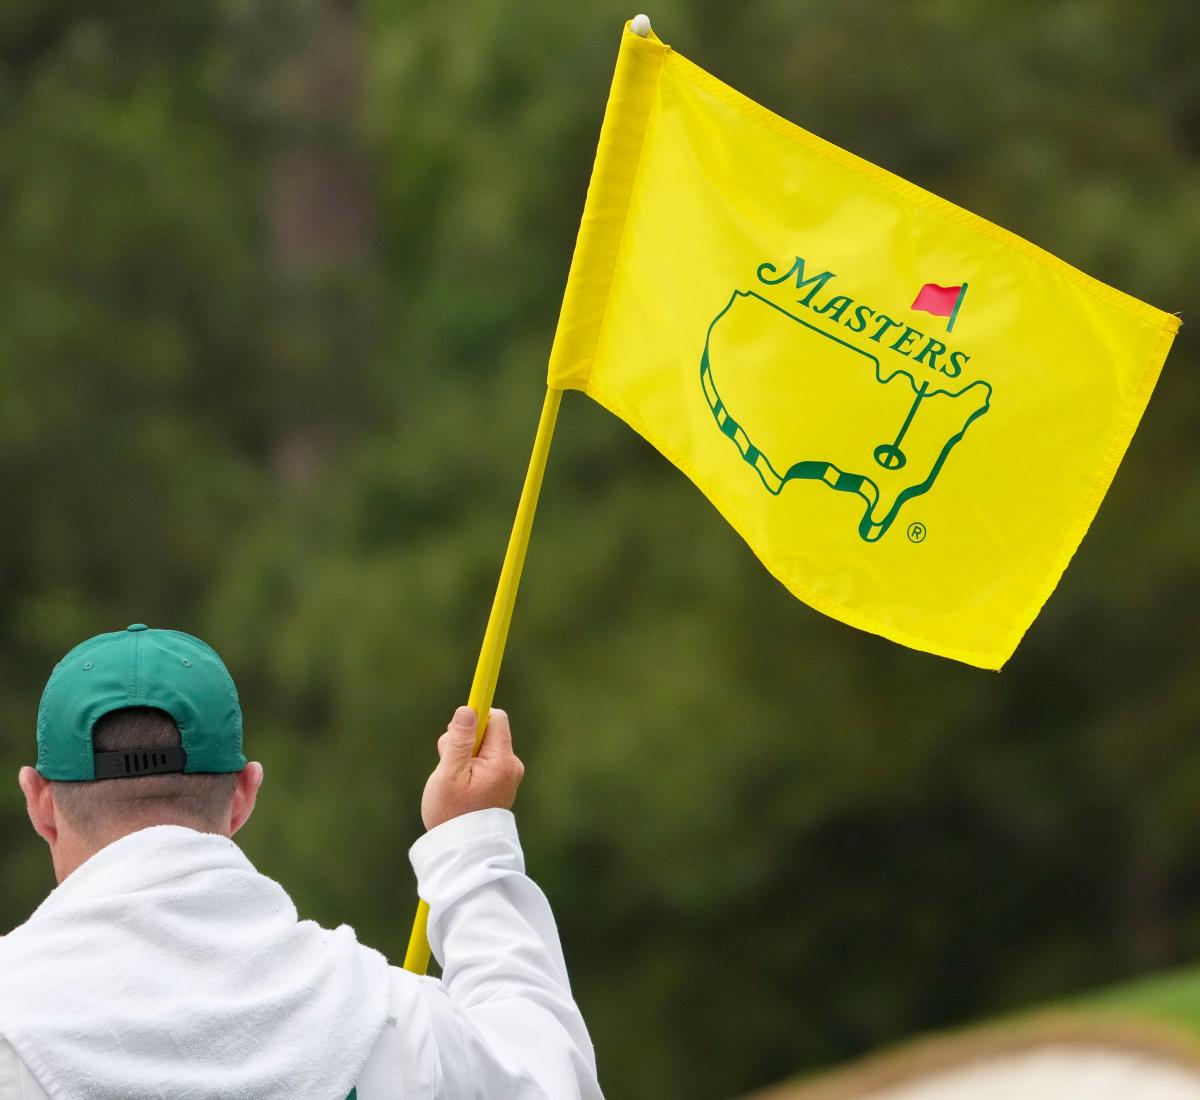 The Masters is handing out eclipse glasses ahead of Monday's 2024 solar